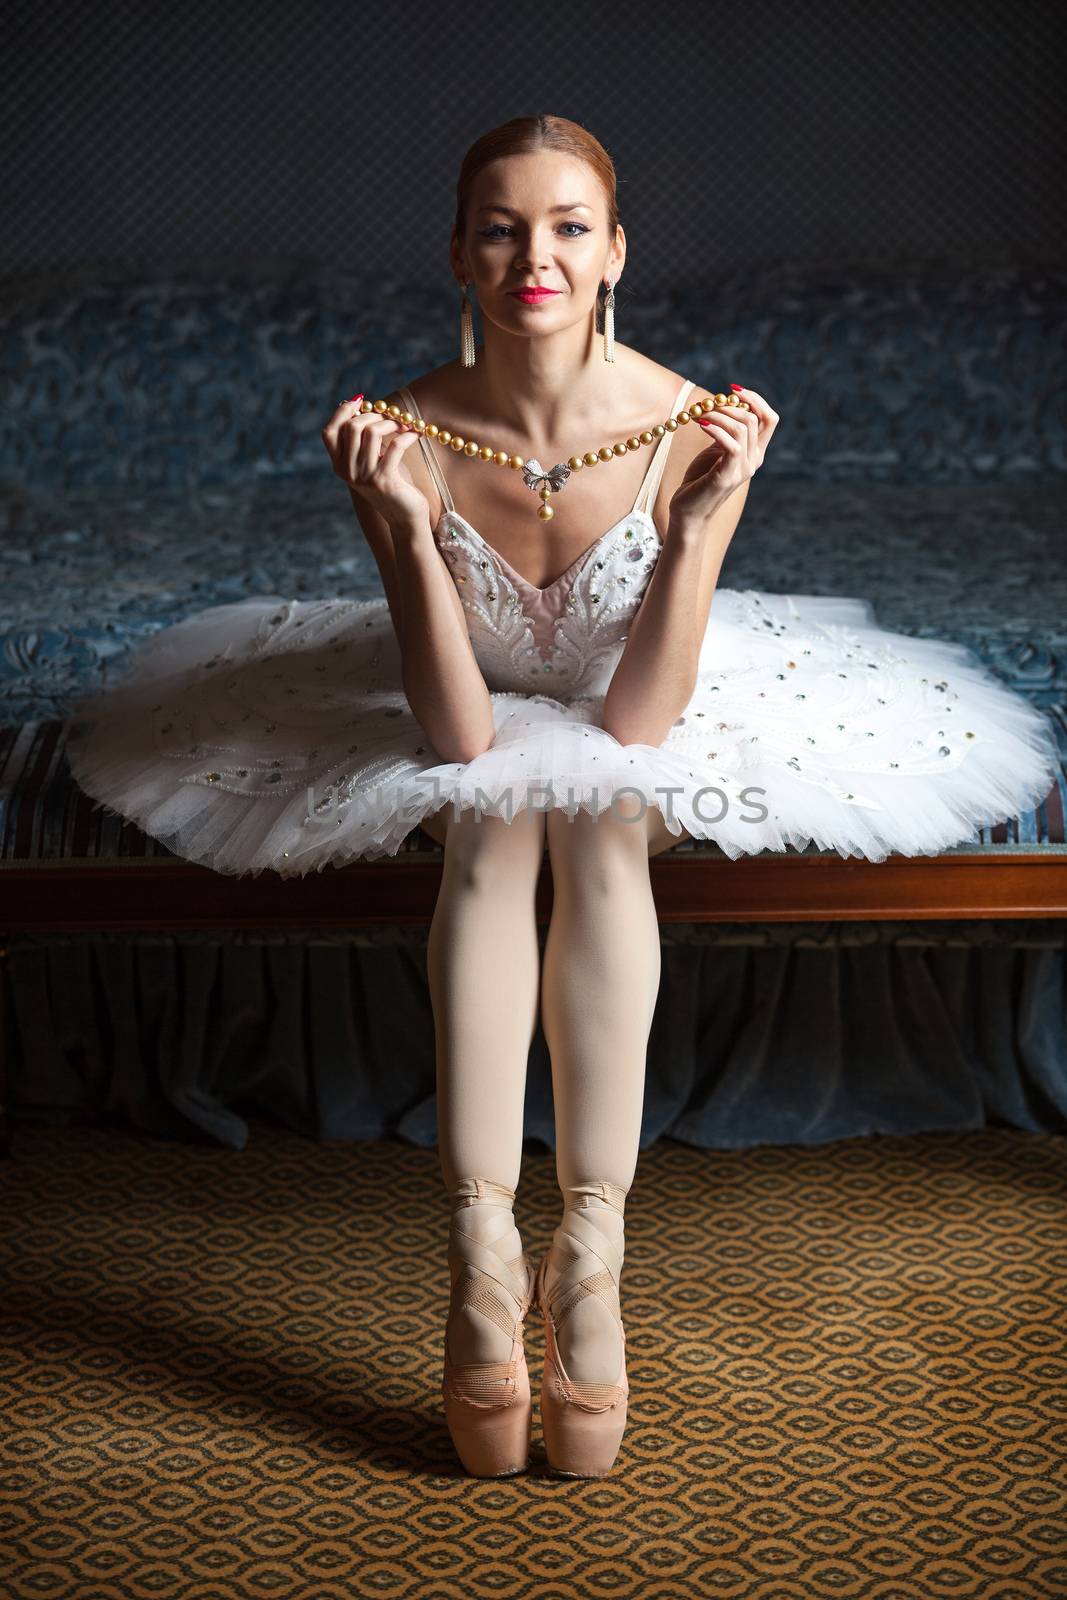 Ballerina holding pearl necklace and smiling in luxury interior